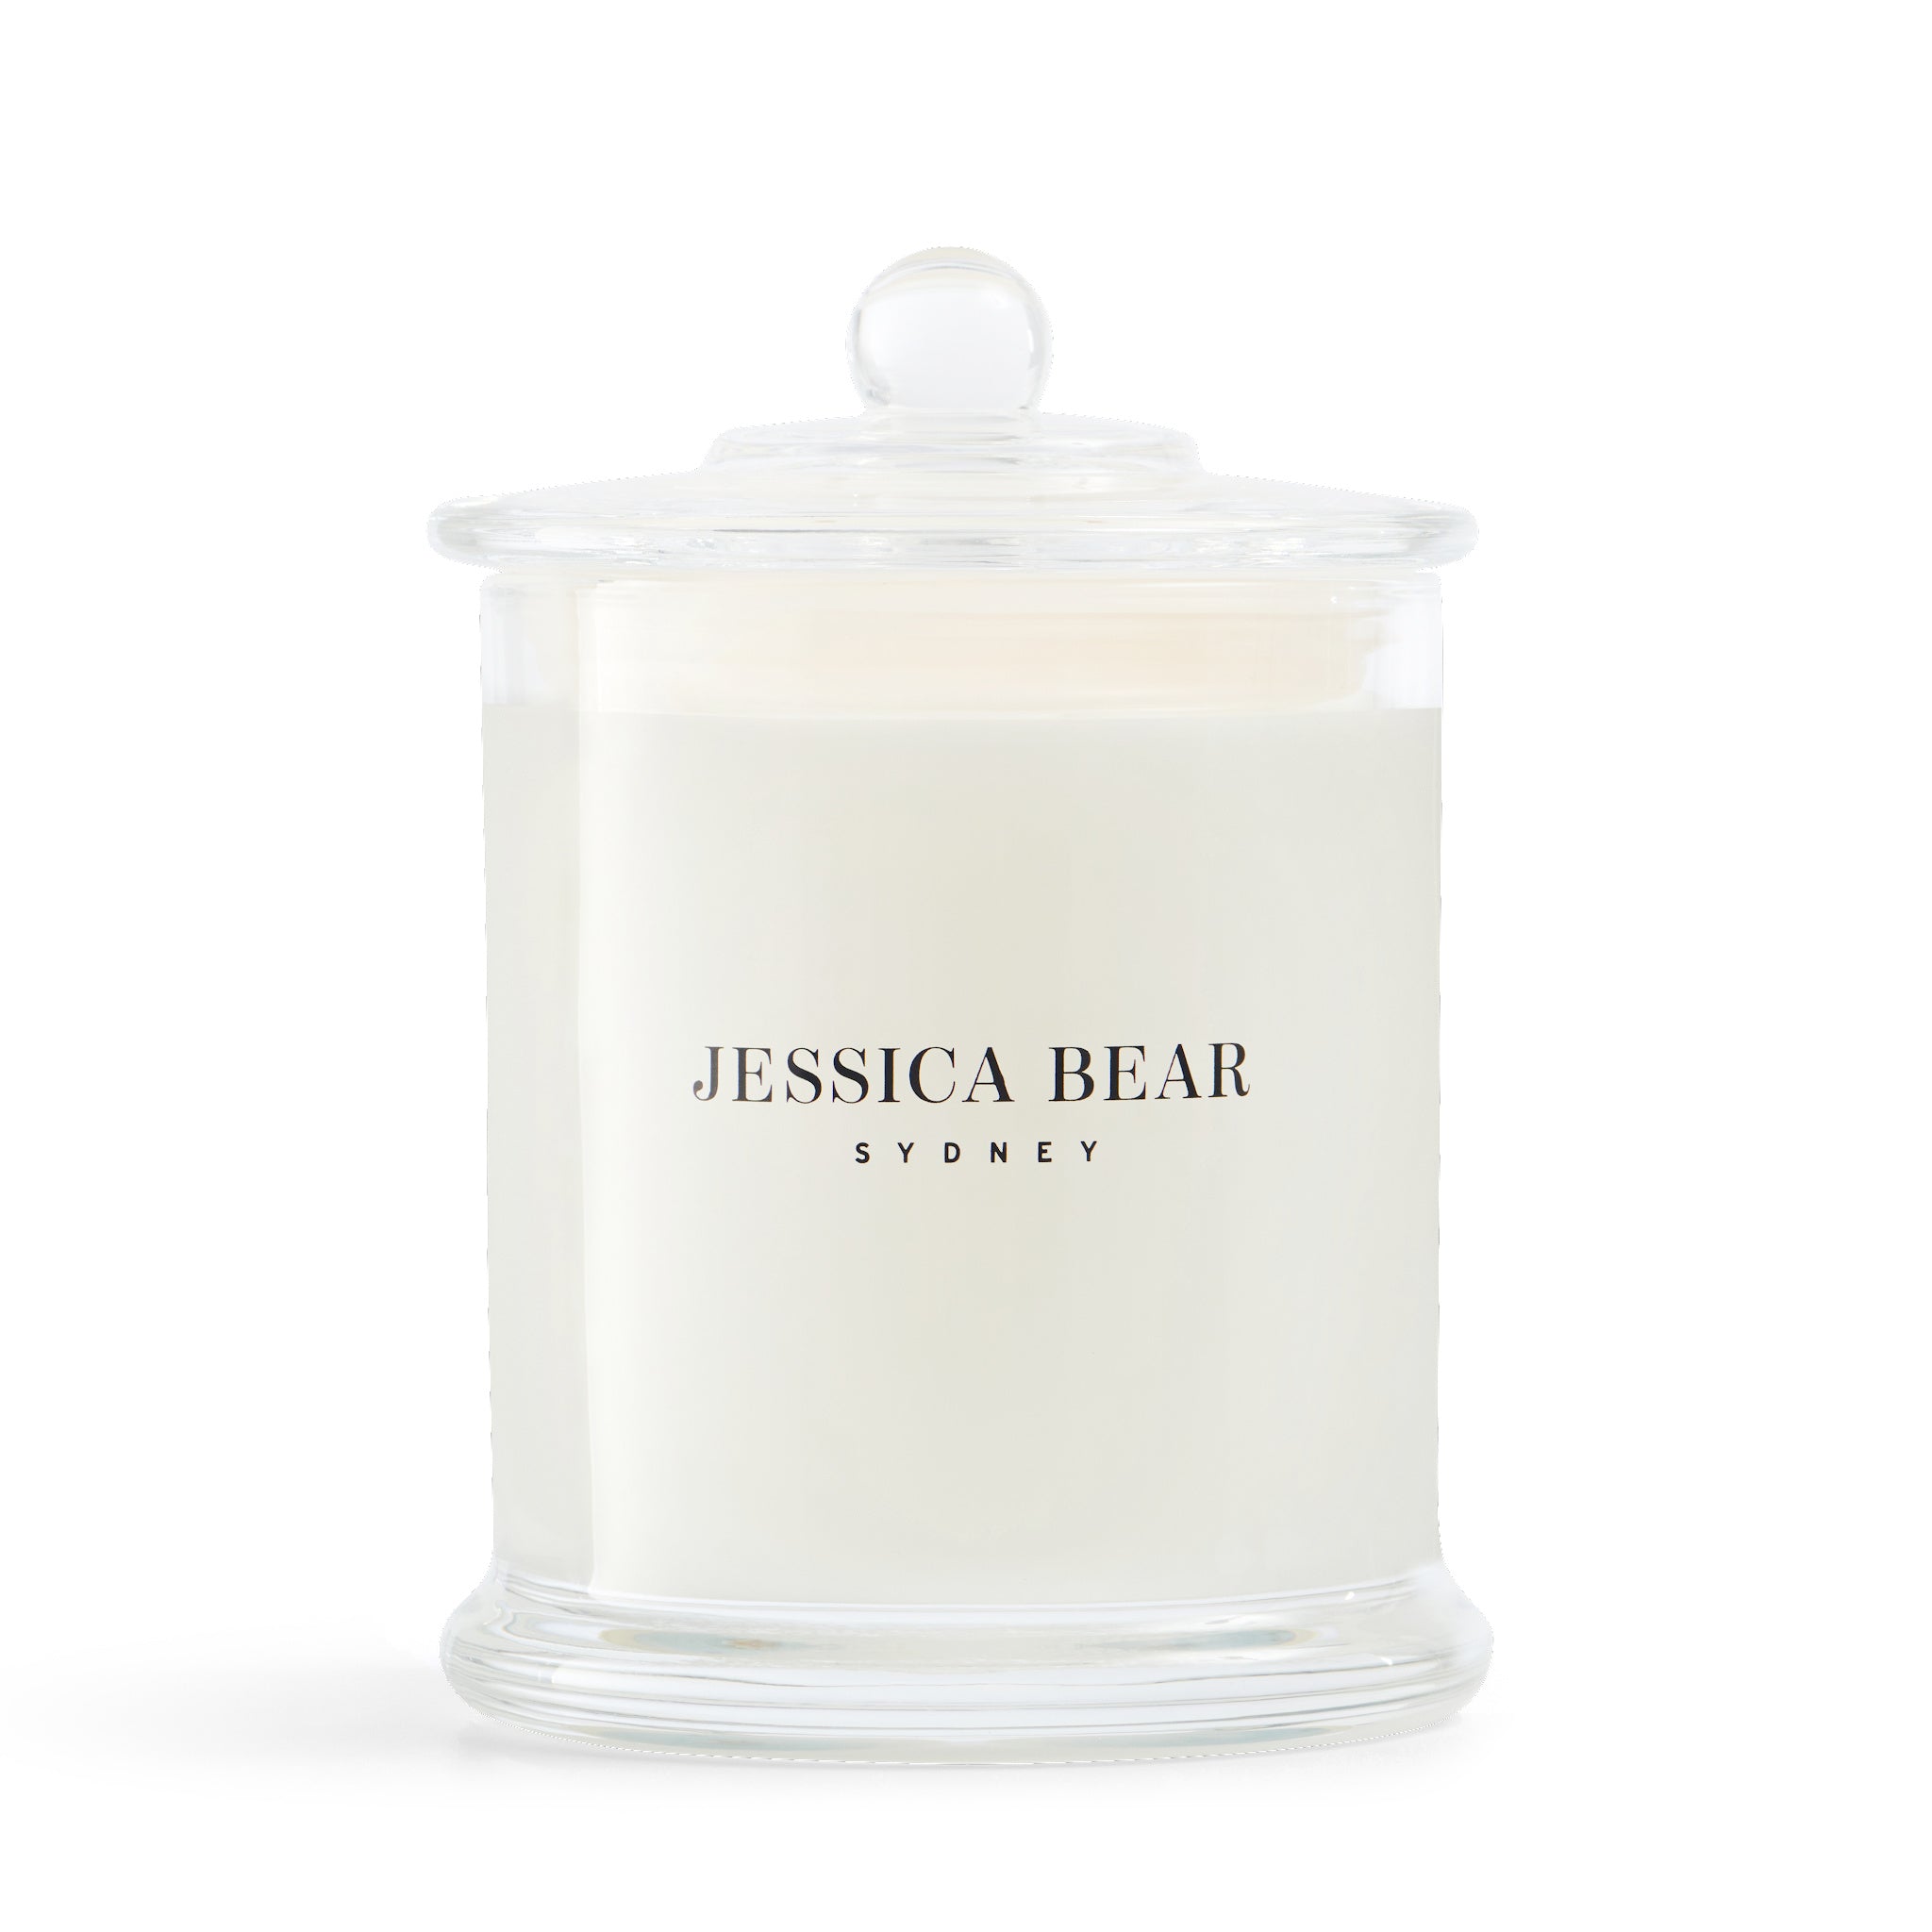 Bear - 380g Scented Candle